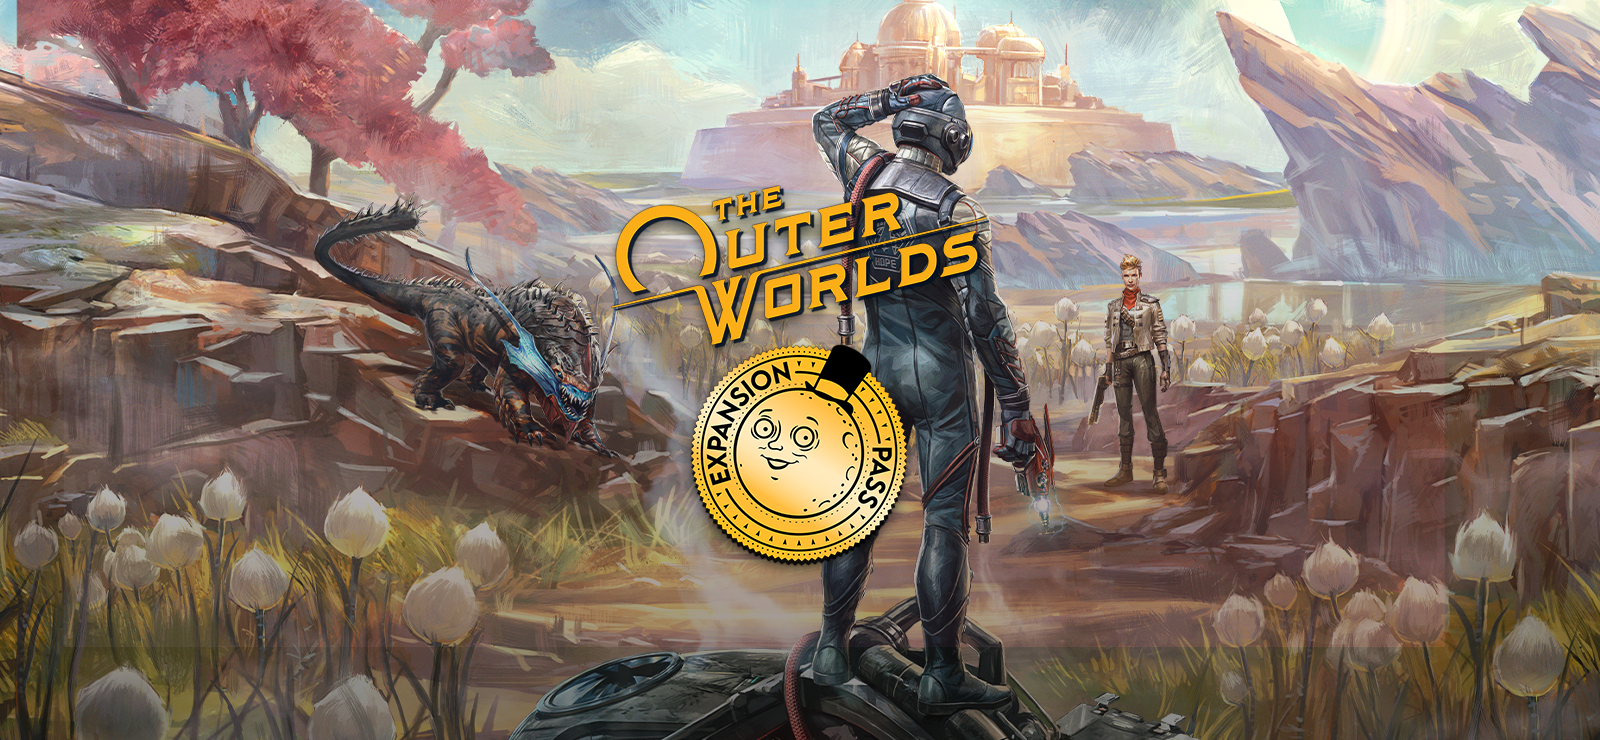 34% The Outer Worlds on